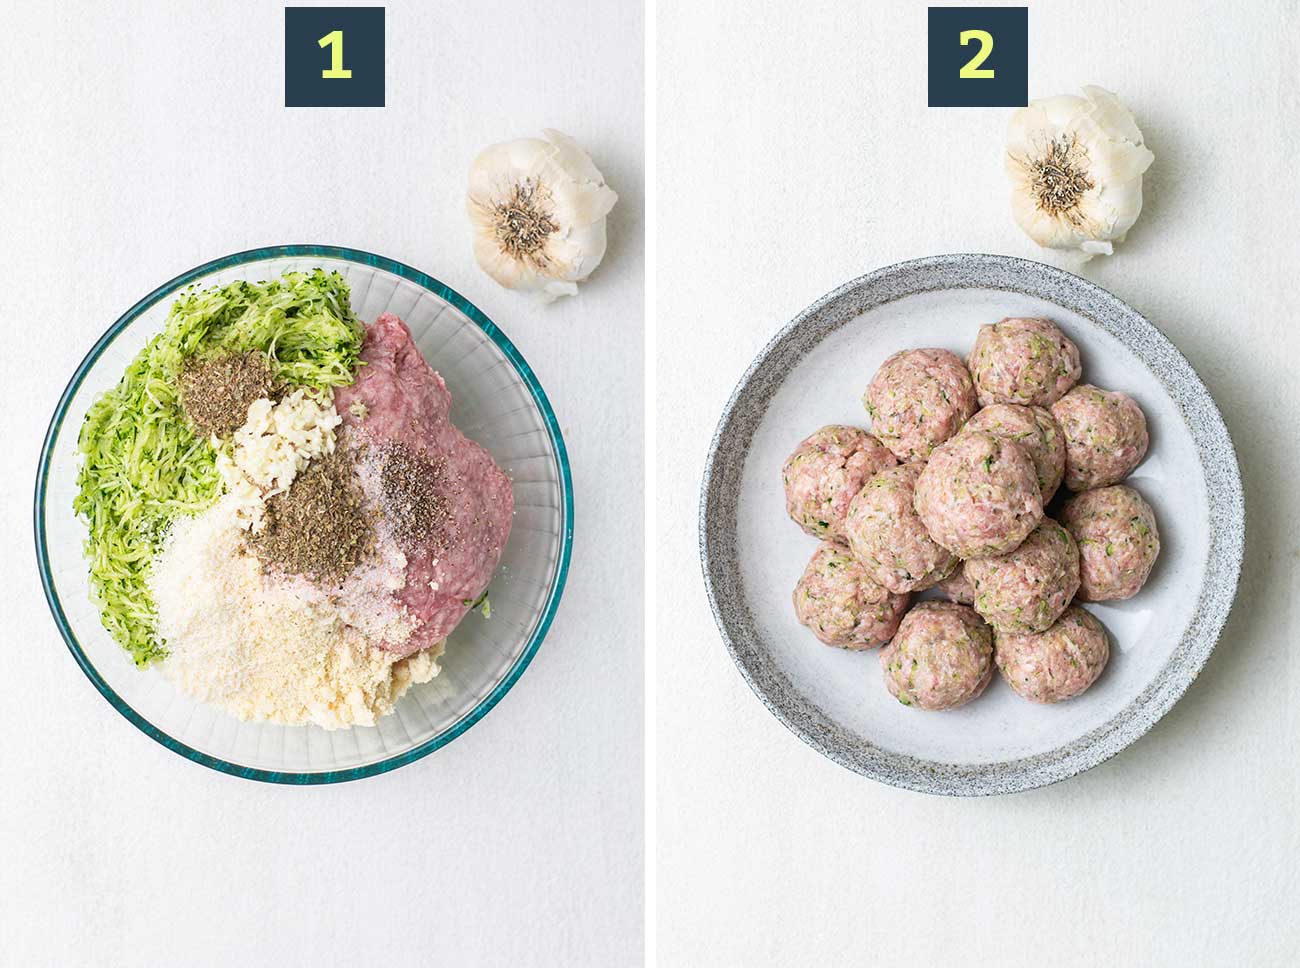 Step1 shows combining all the meatball ingredients, and step 2 shows forming meatballs.